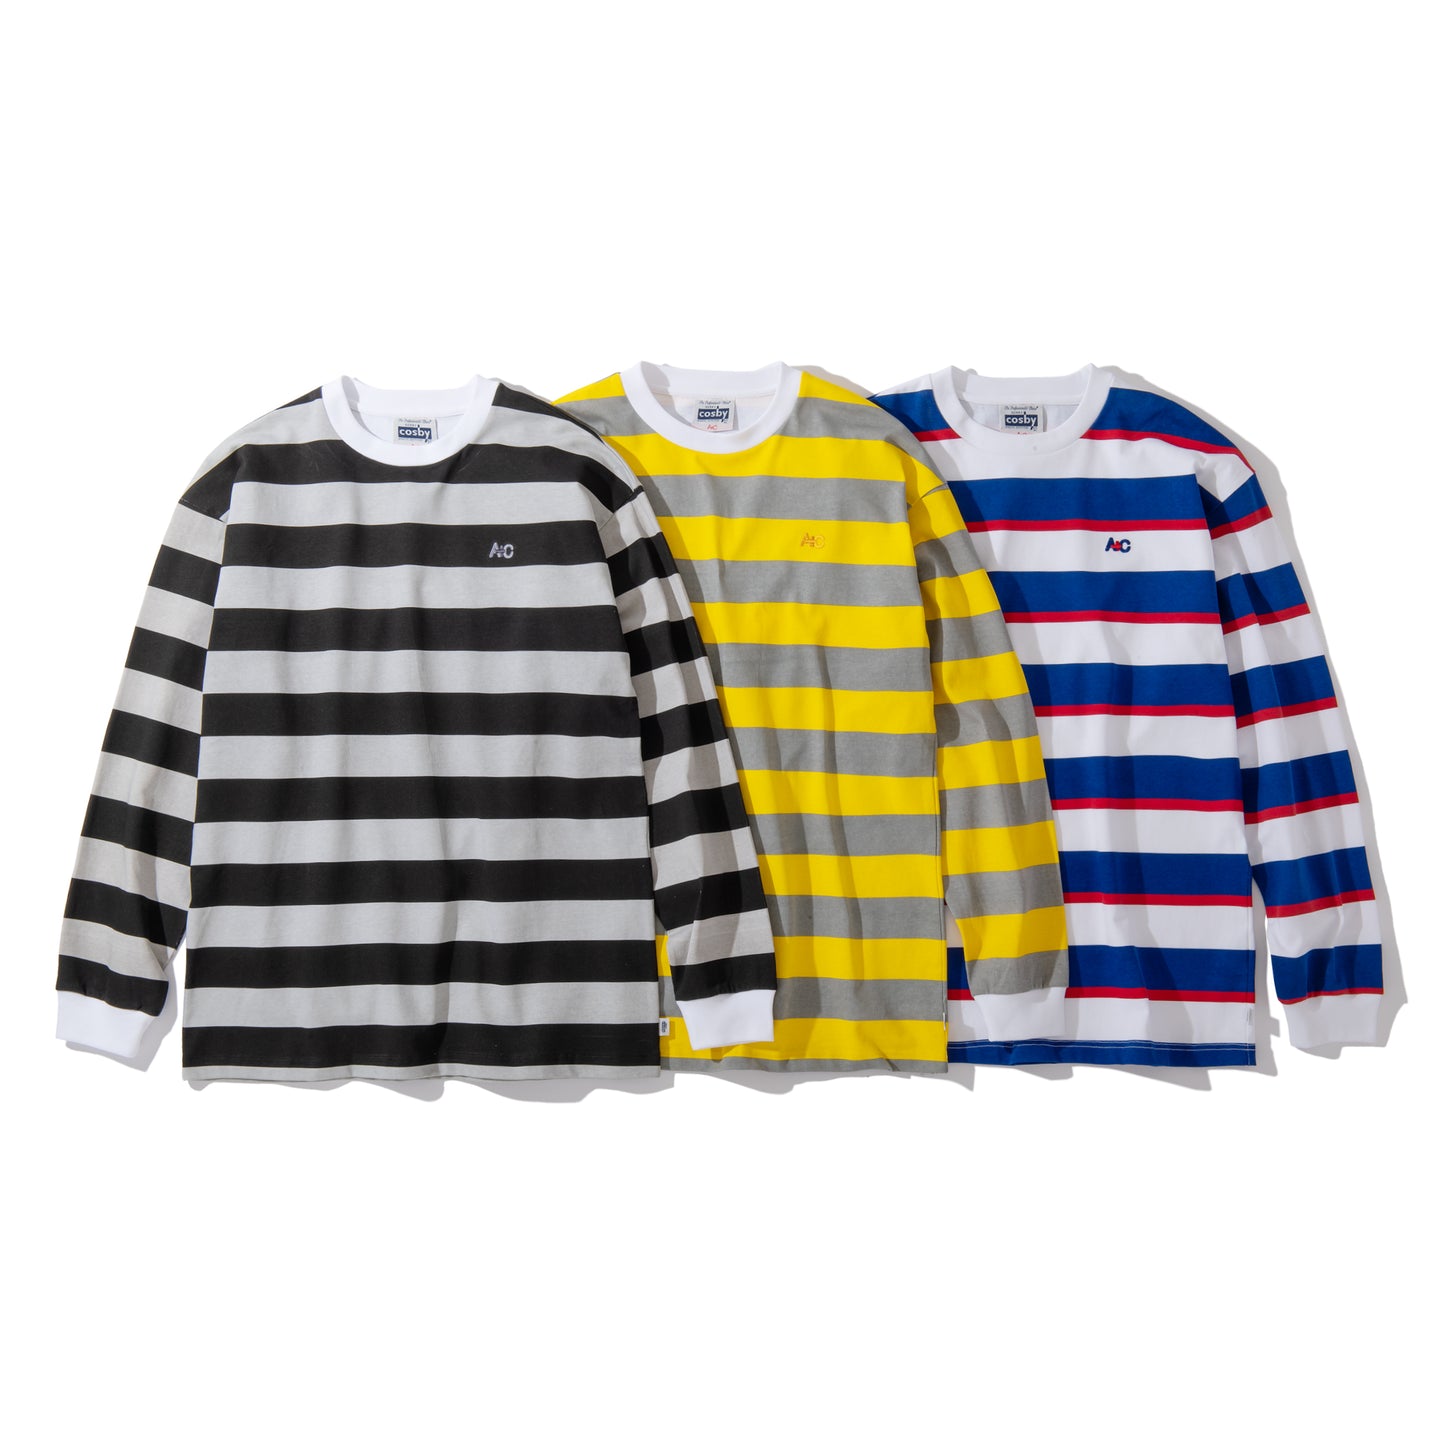 Gerry Cosby A+C BORDER L/S TEE / BLACK